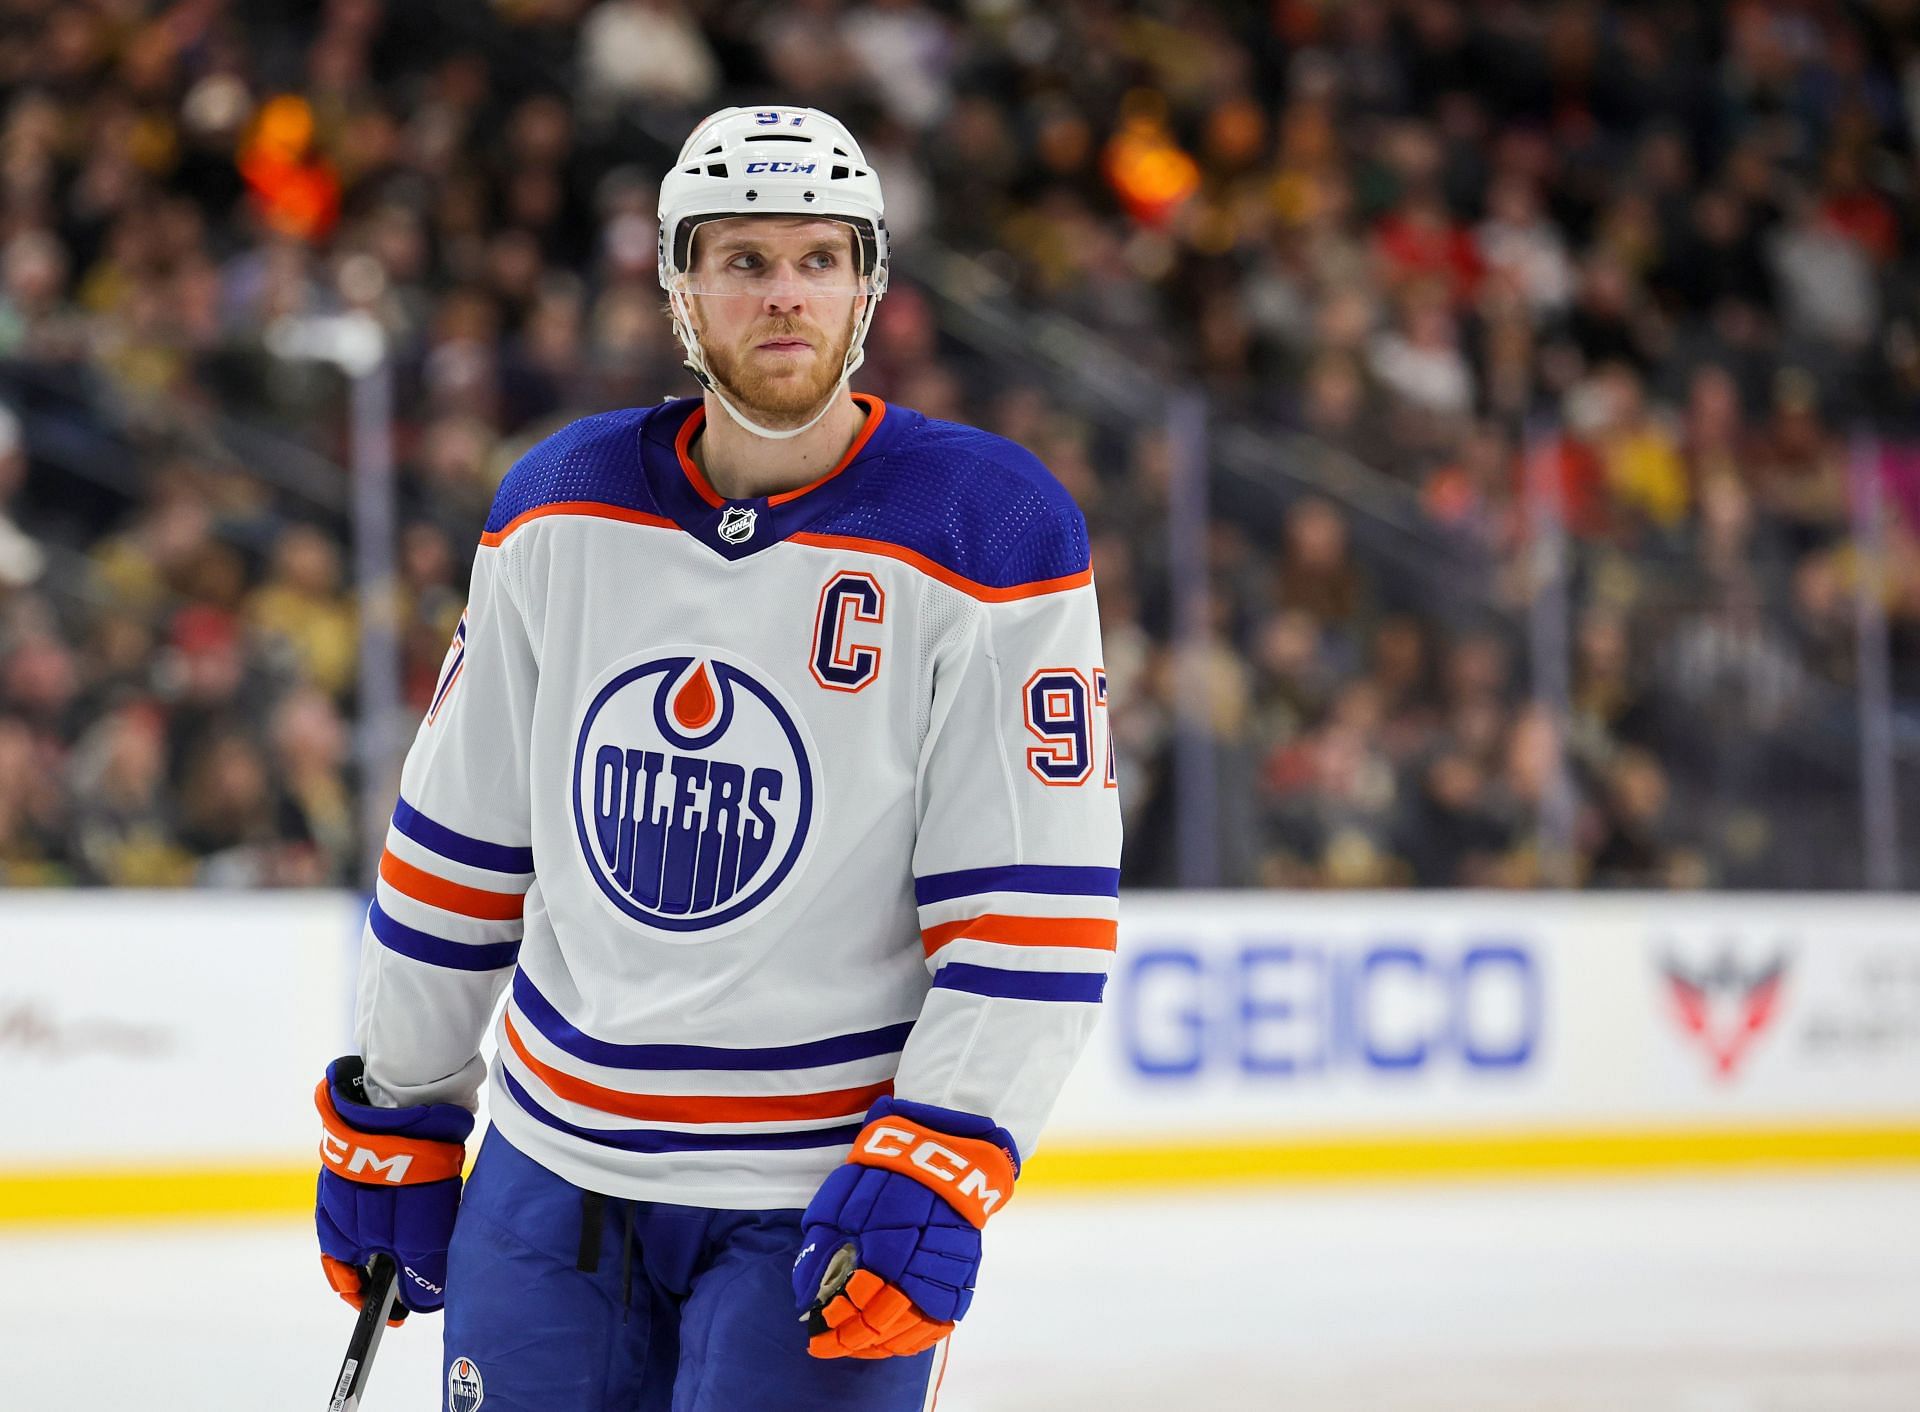 Oilers' McDavid 6th player in NHL history with 150-point season